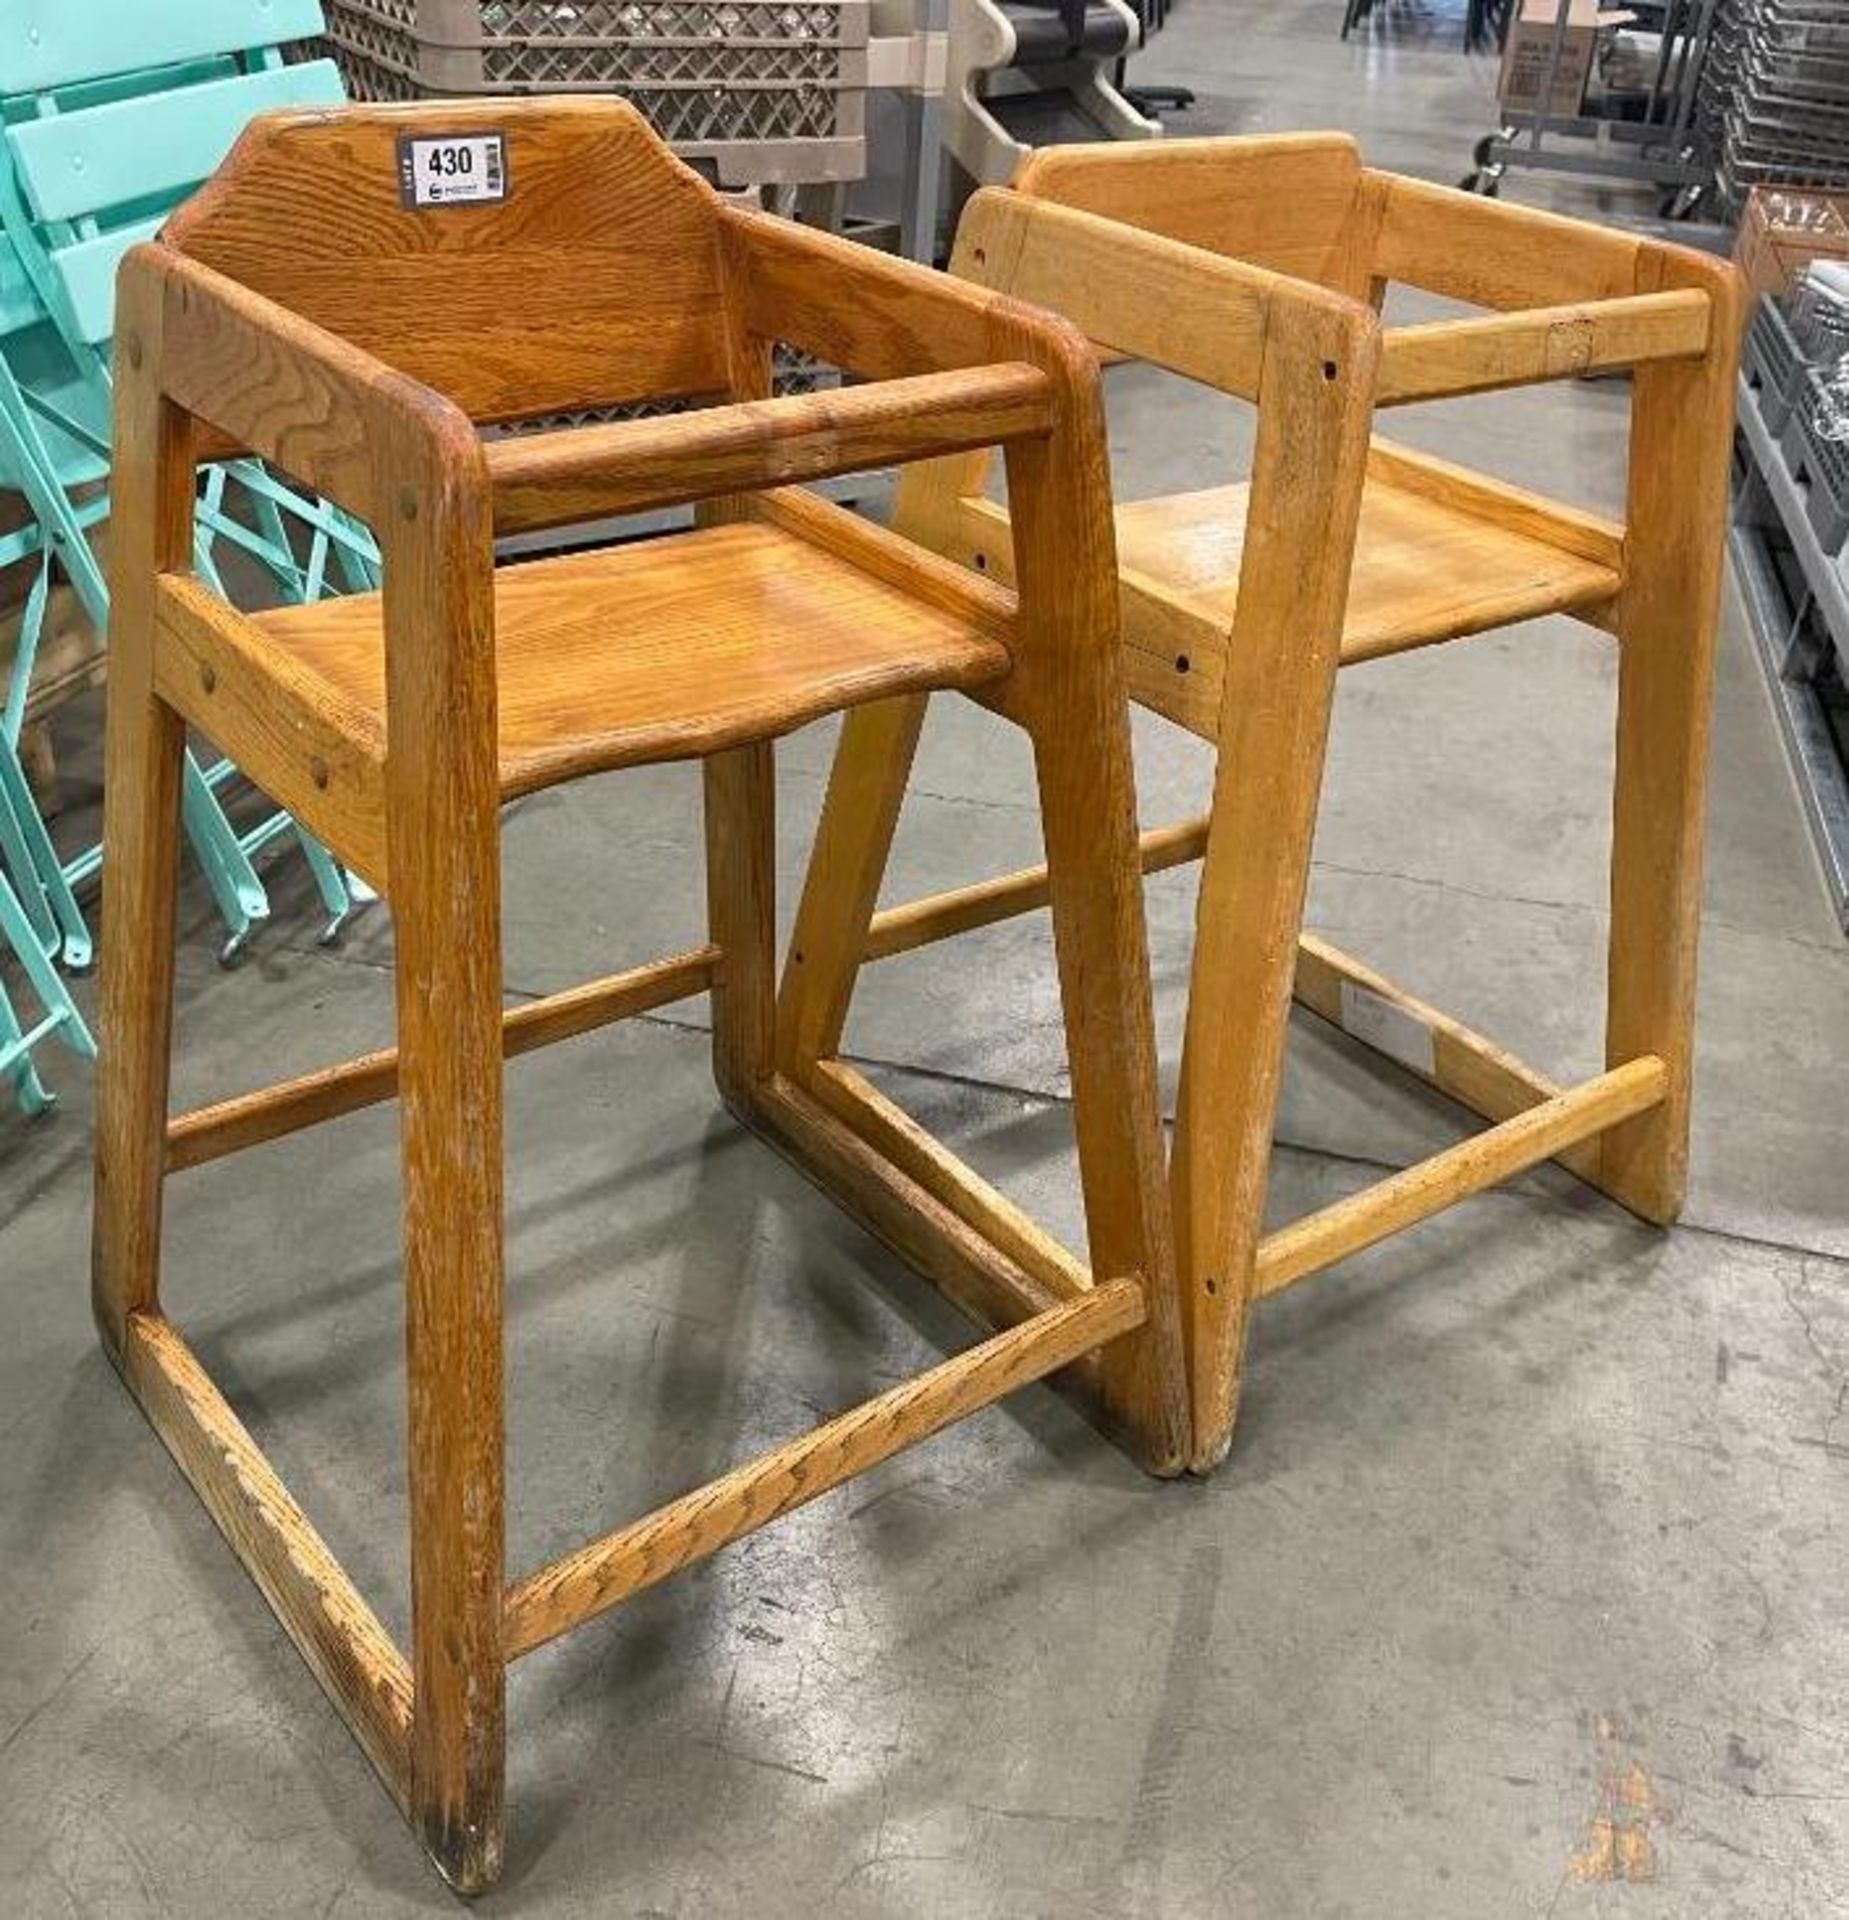 (2) WOODEN HIGH CHAIRS